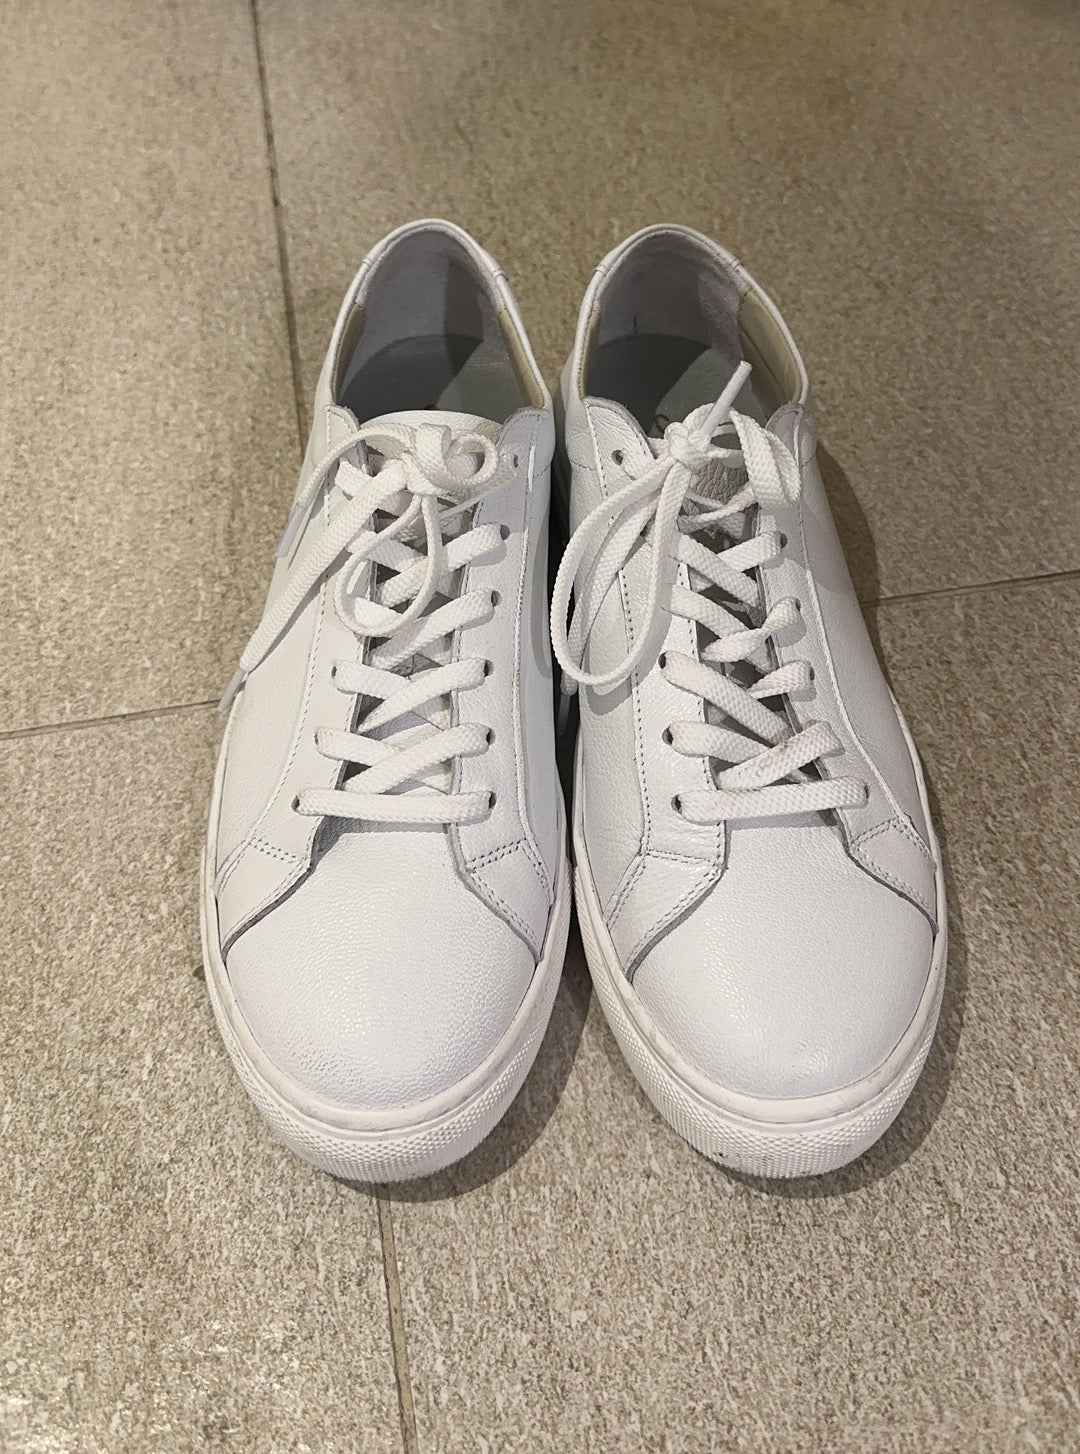 Real leather white sneakers